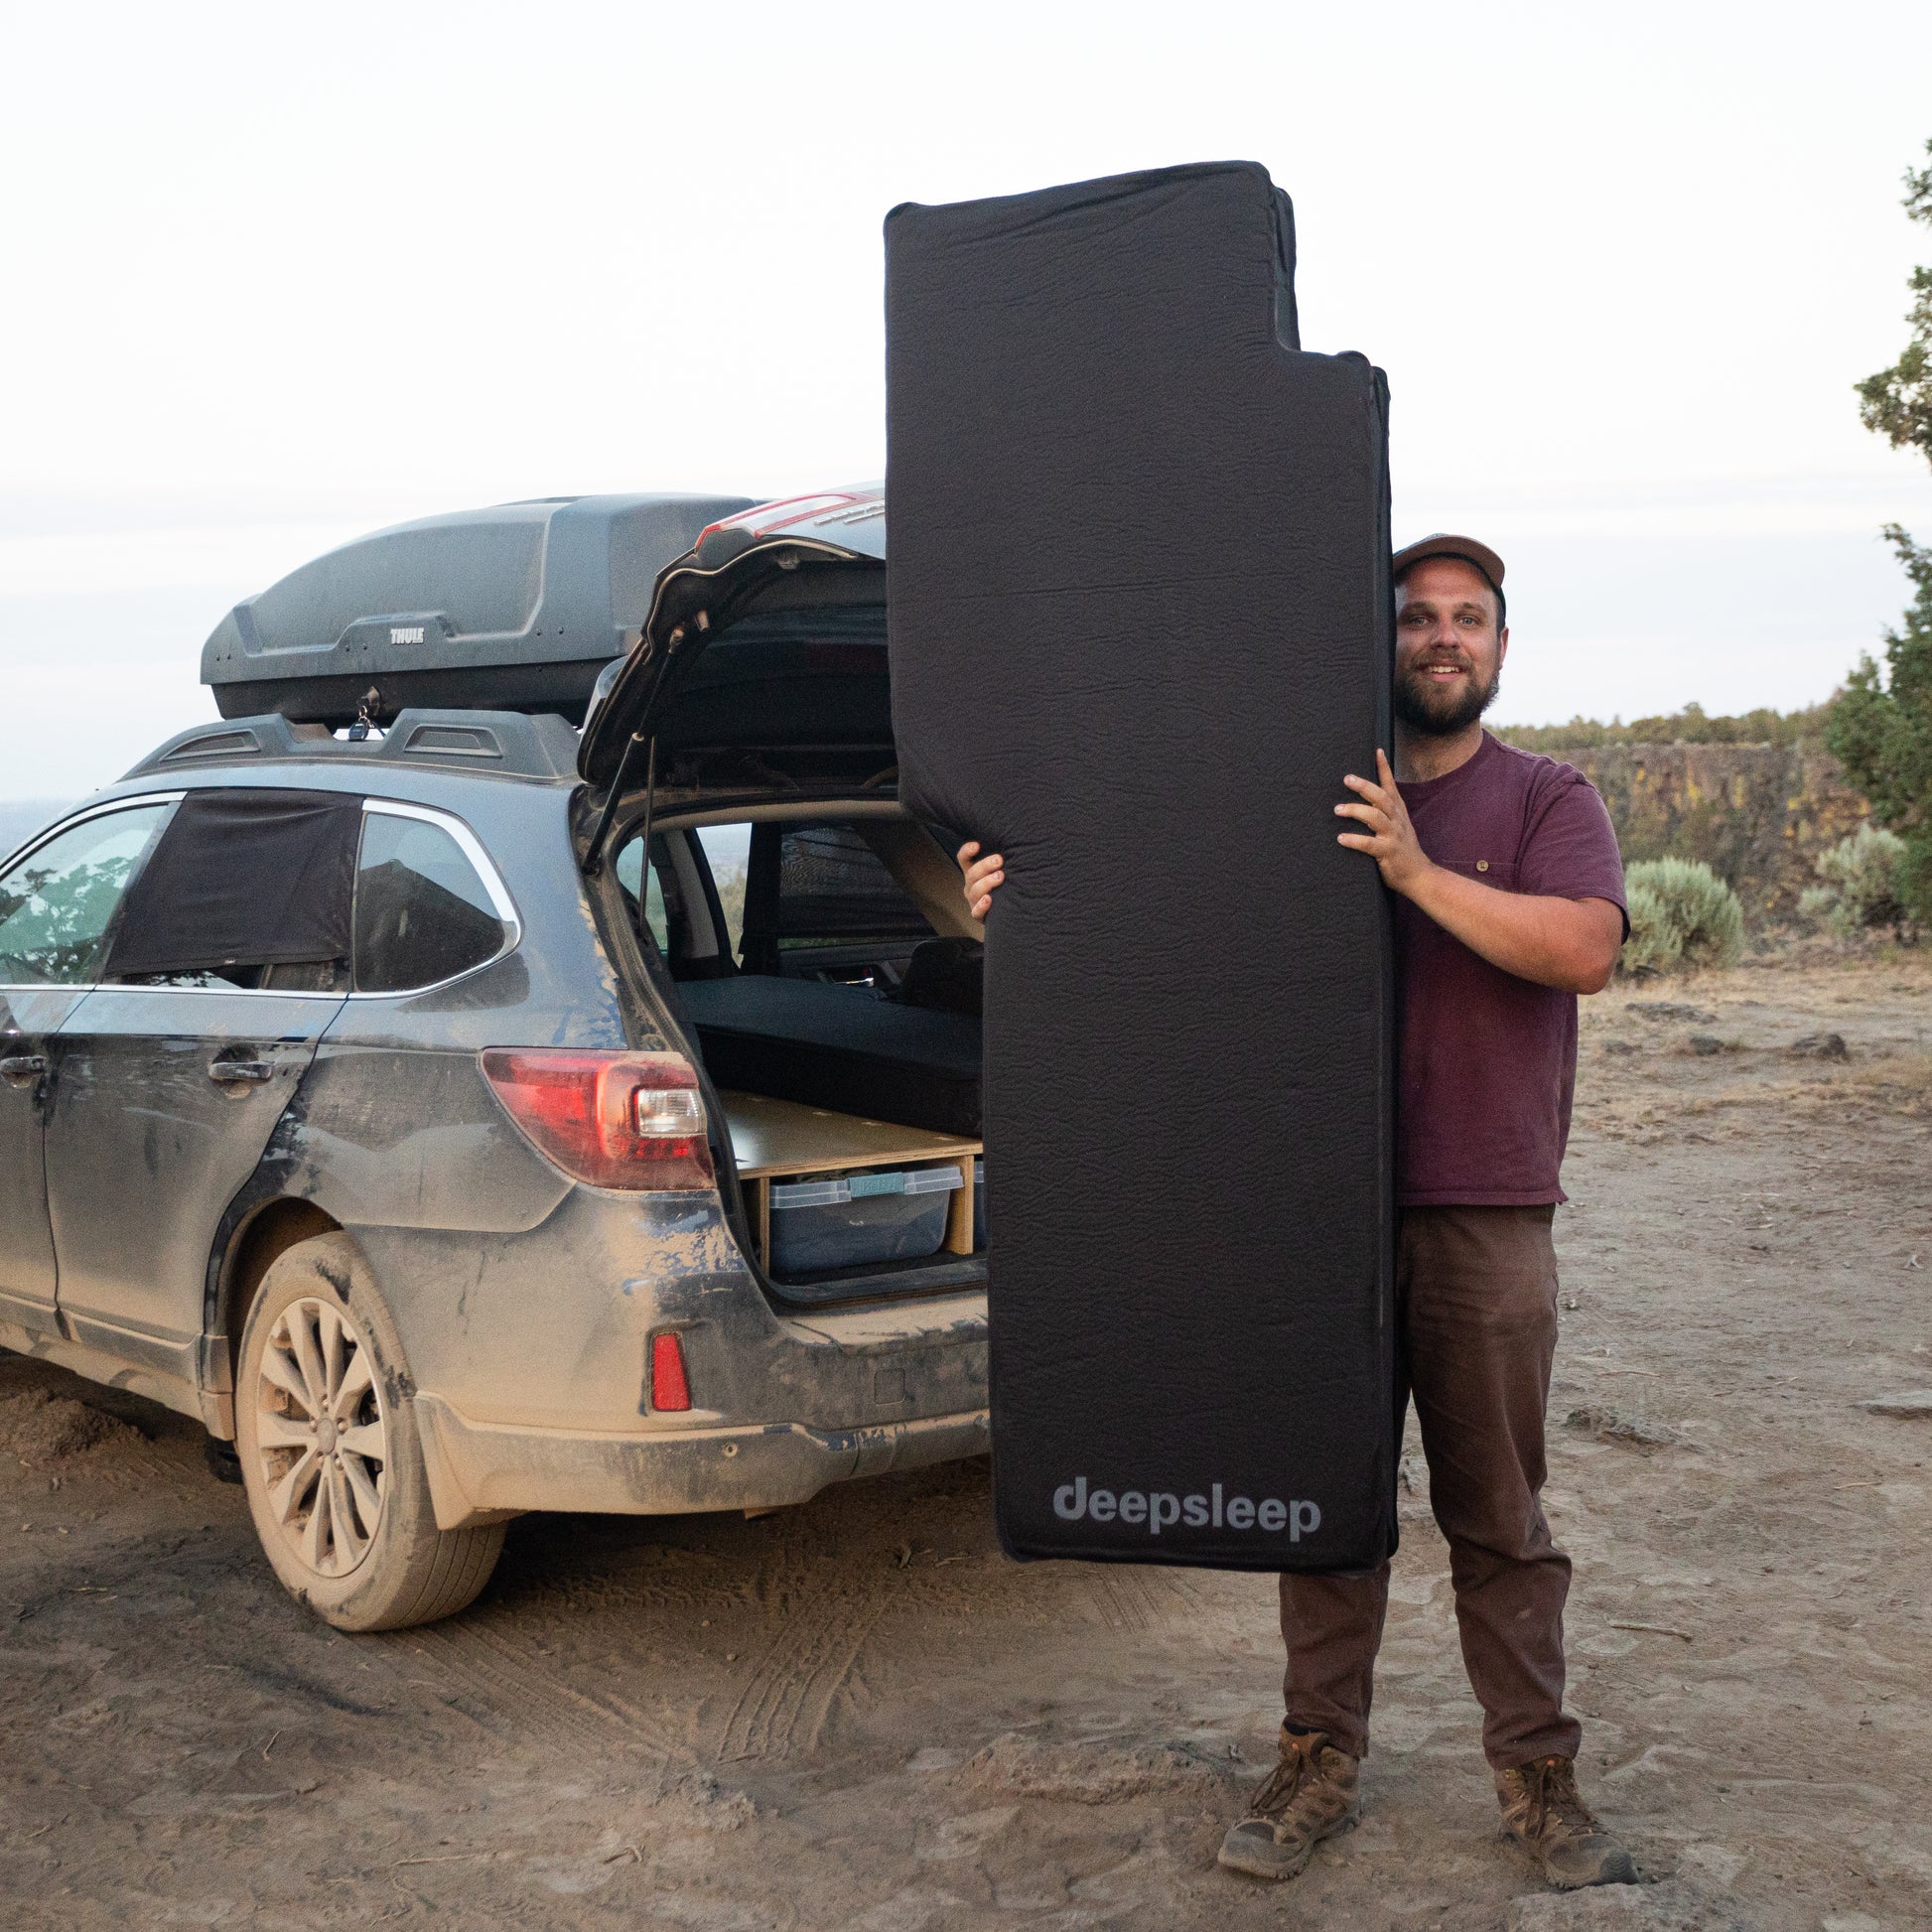 A man standing in front of a Subaru Outback SUV with a CarToCamp Deepsleep Solo Mat and a large piece of luggage.